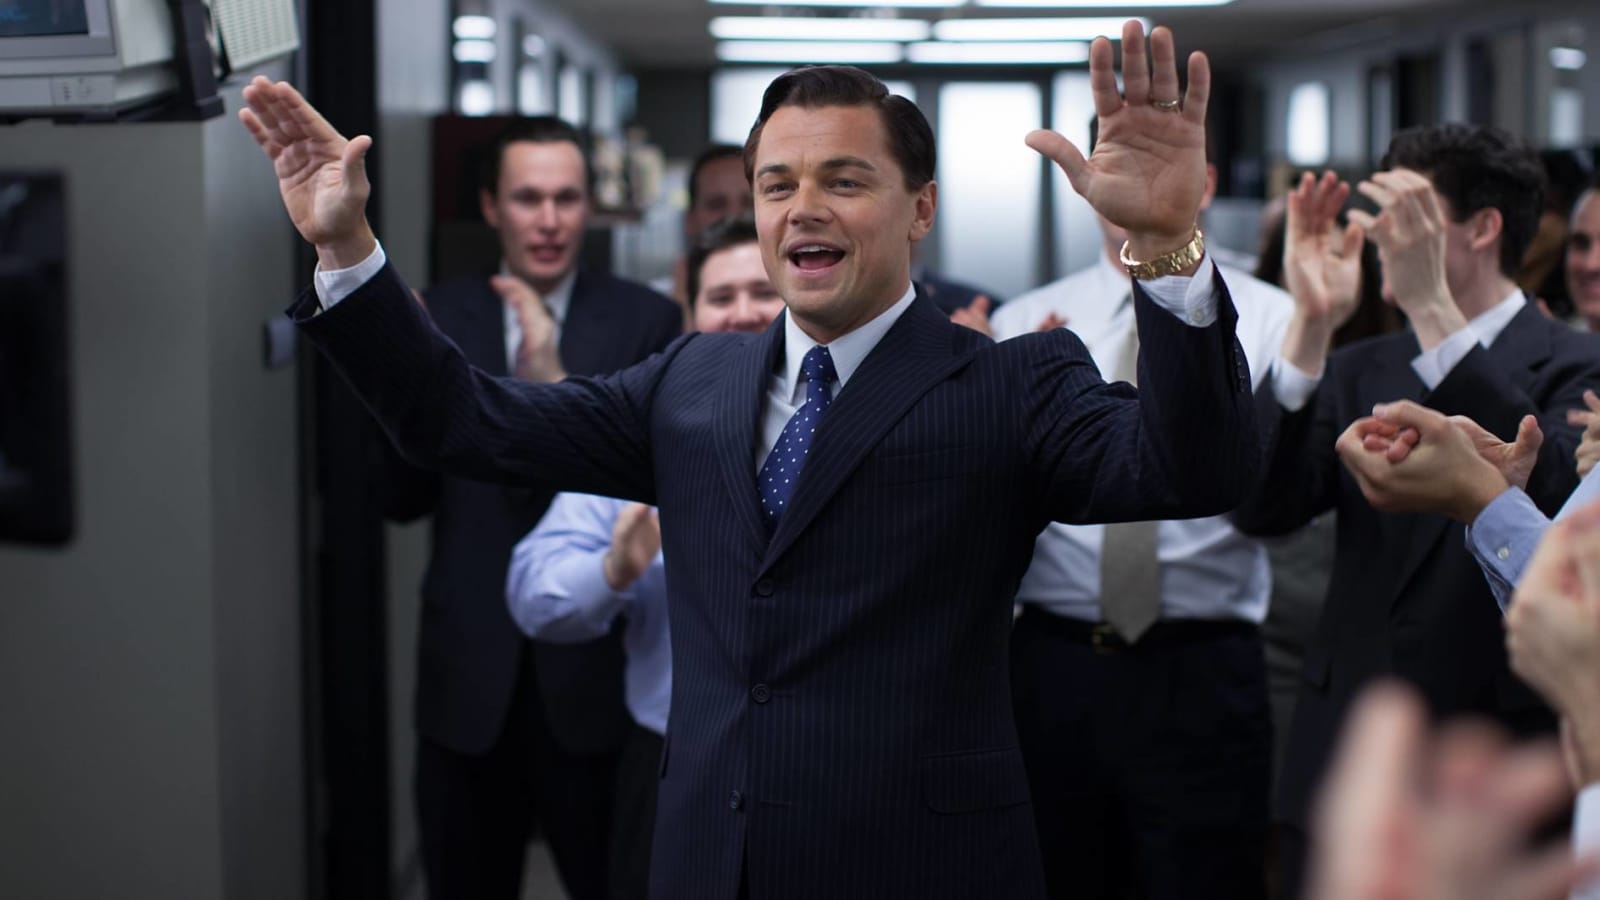 20 facts you might not know about 'The Wolf of Wall Street'